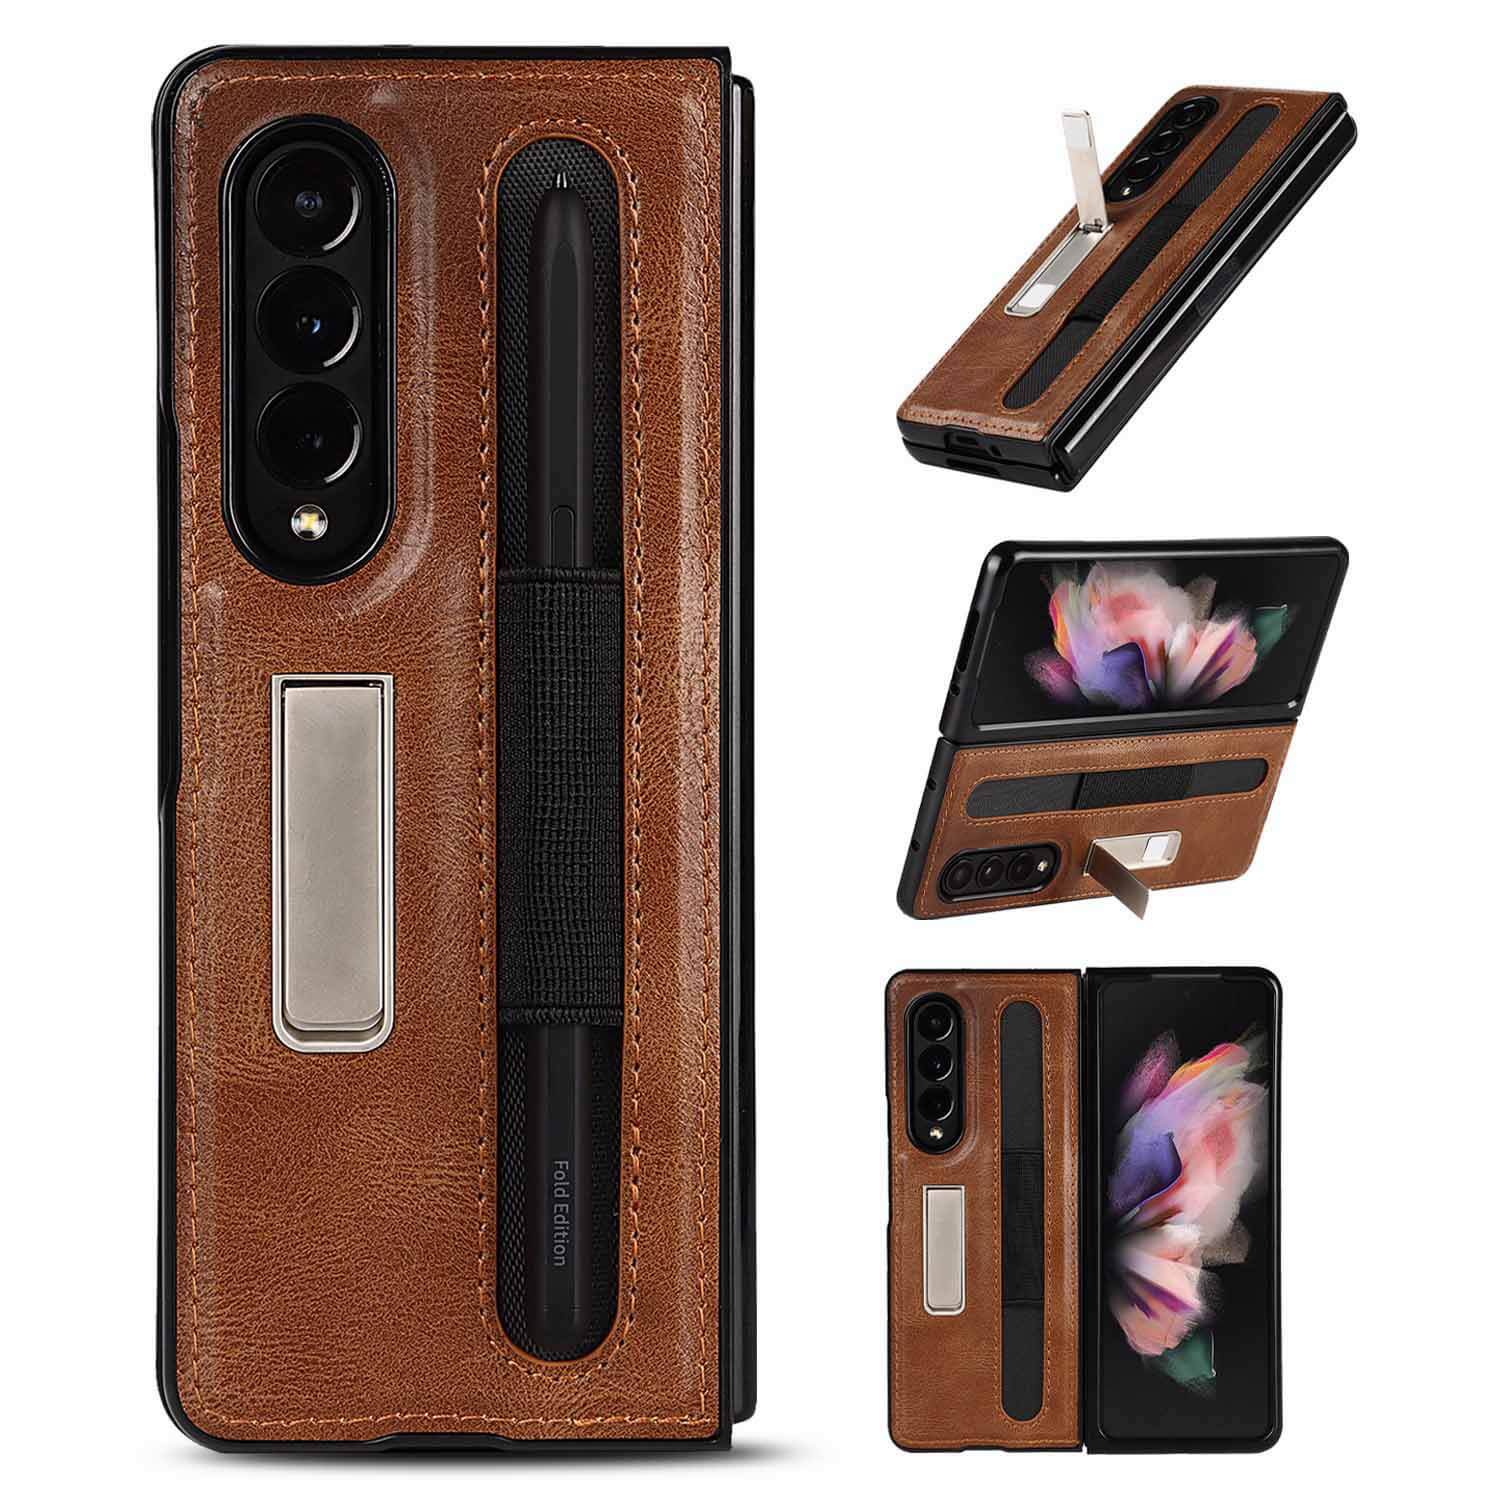 Samsung Galaxy Z Fold 3 Phone Case with S Pen Slot and Kickstand (S-Pen is not Included)